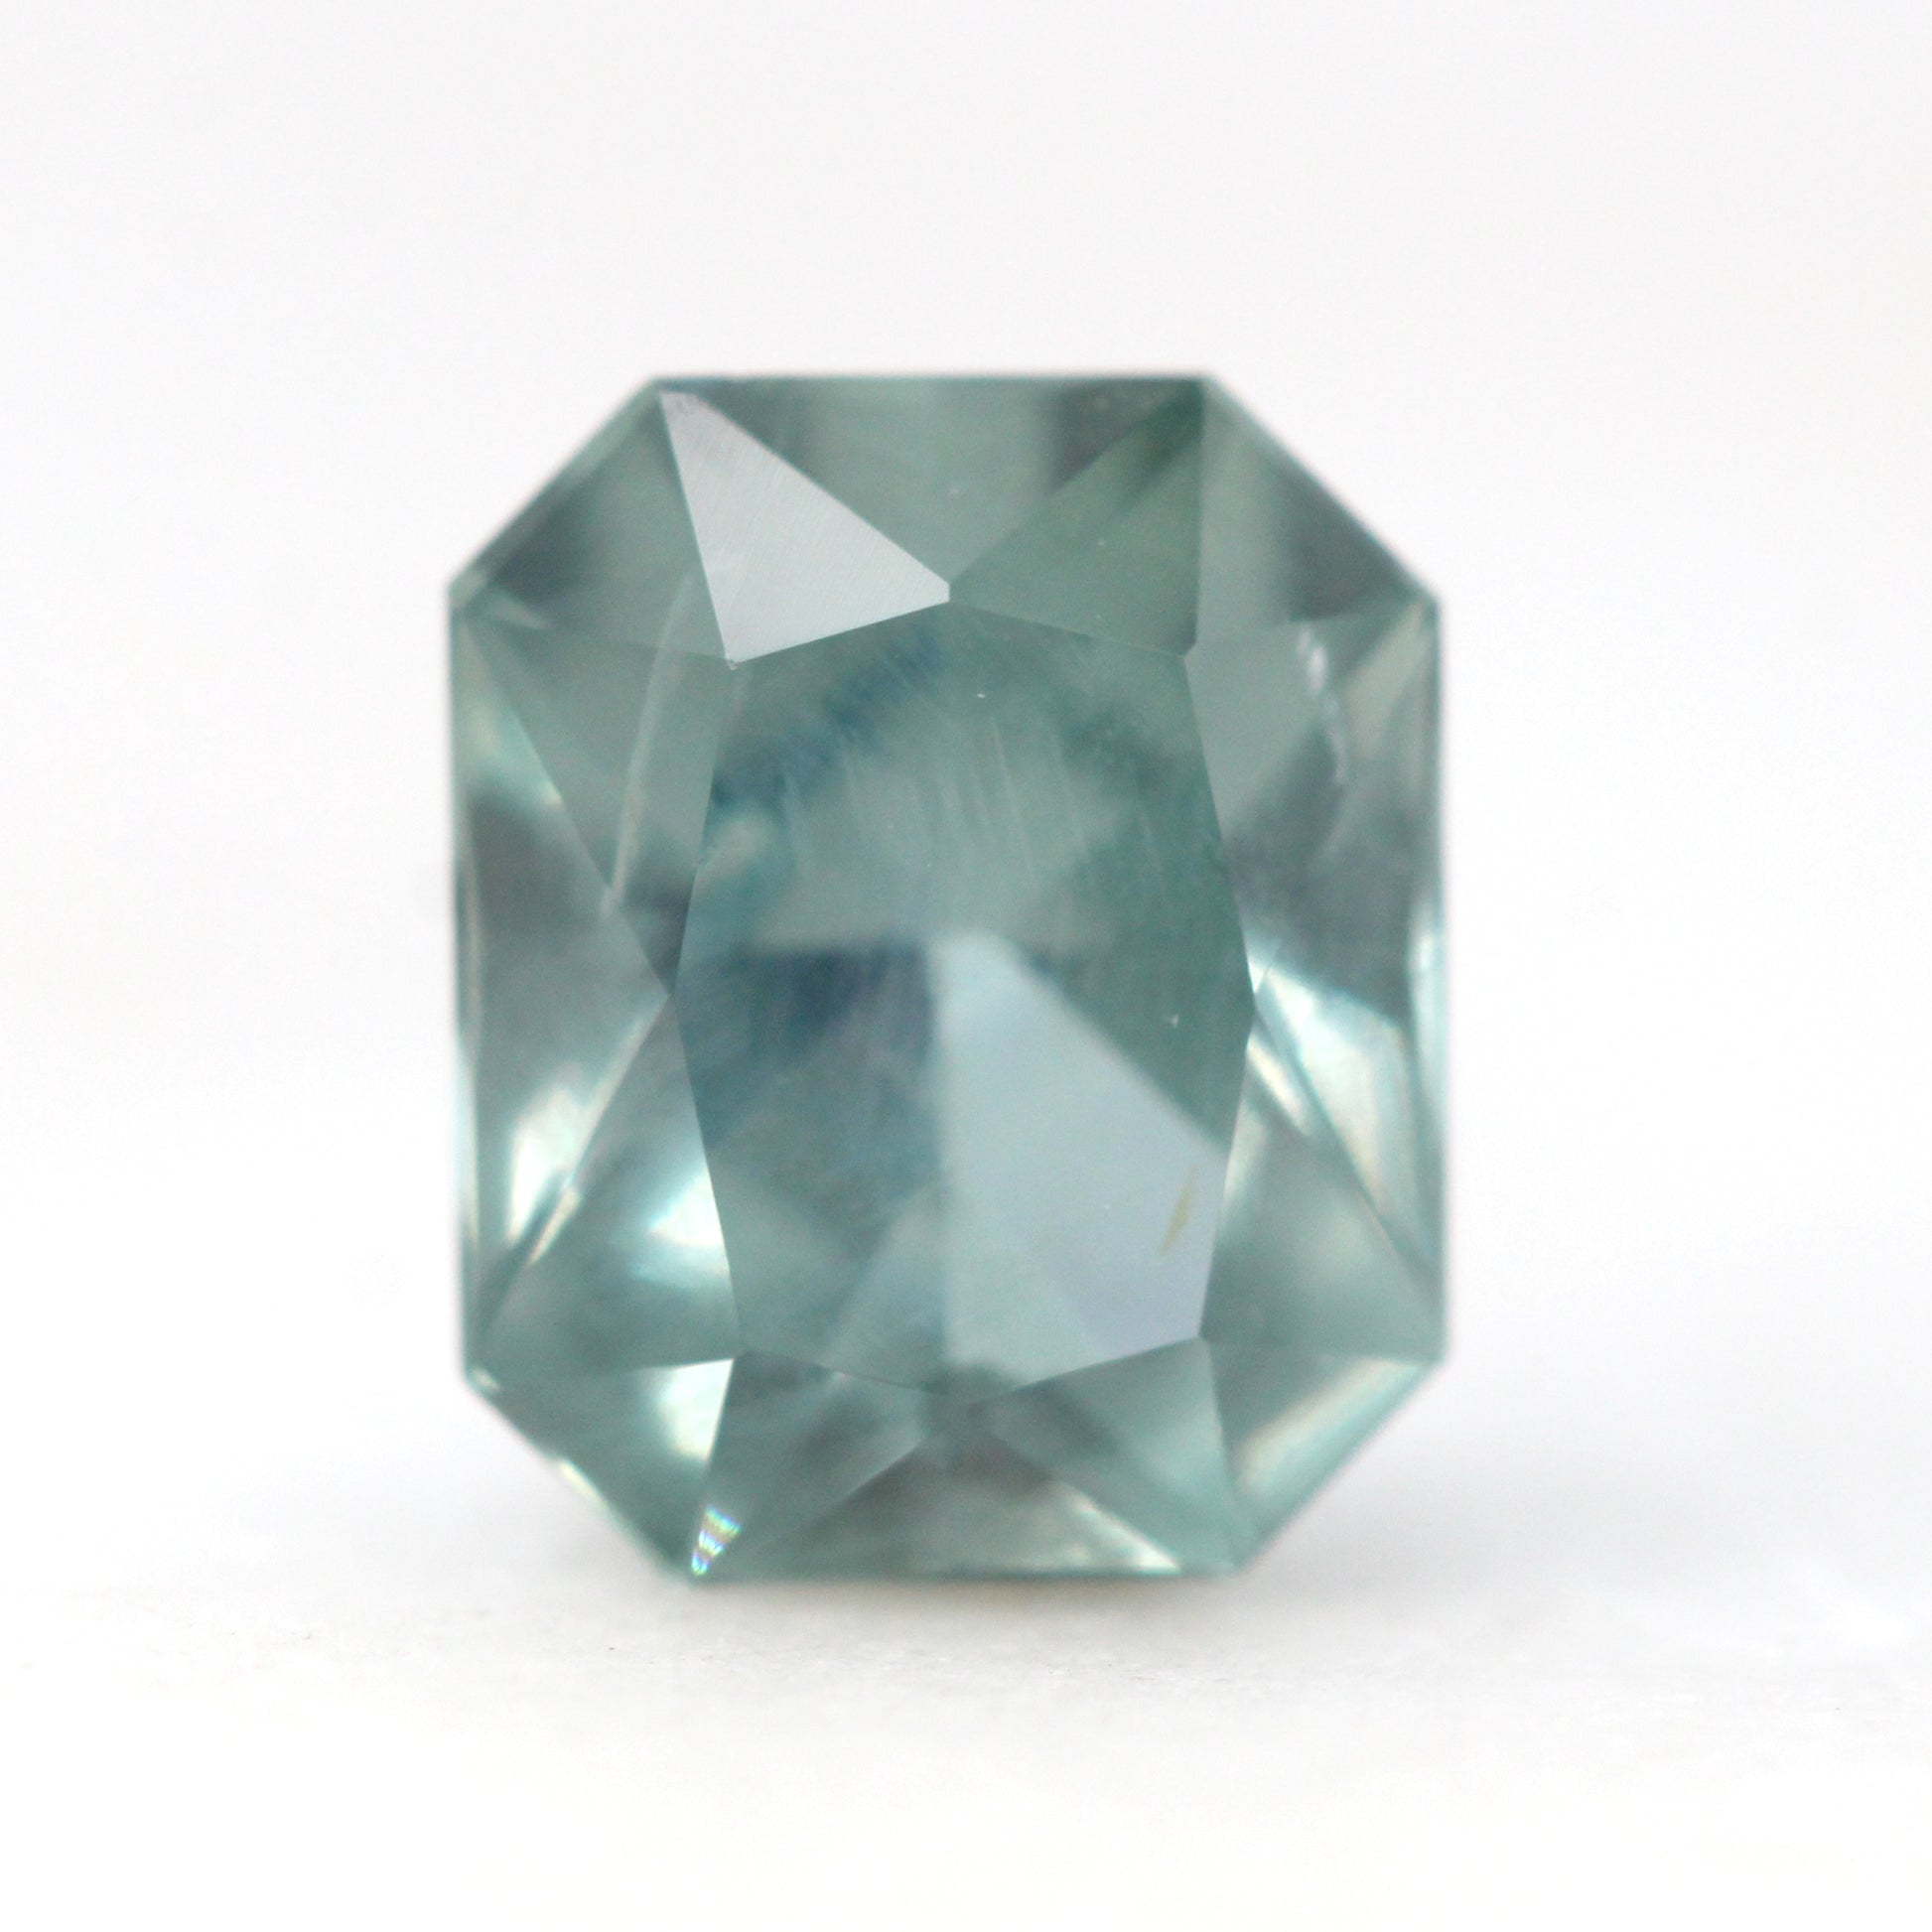 1.55 Carat Light Teal Radiant Cut Montana Sapphire for Custom Work - Inventory Code LTMS155 - Midwinter Co. Alternative Bridal Rings and Modern Fine Jewelry